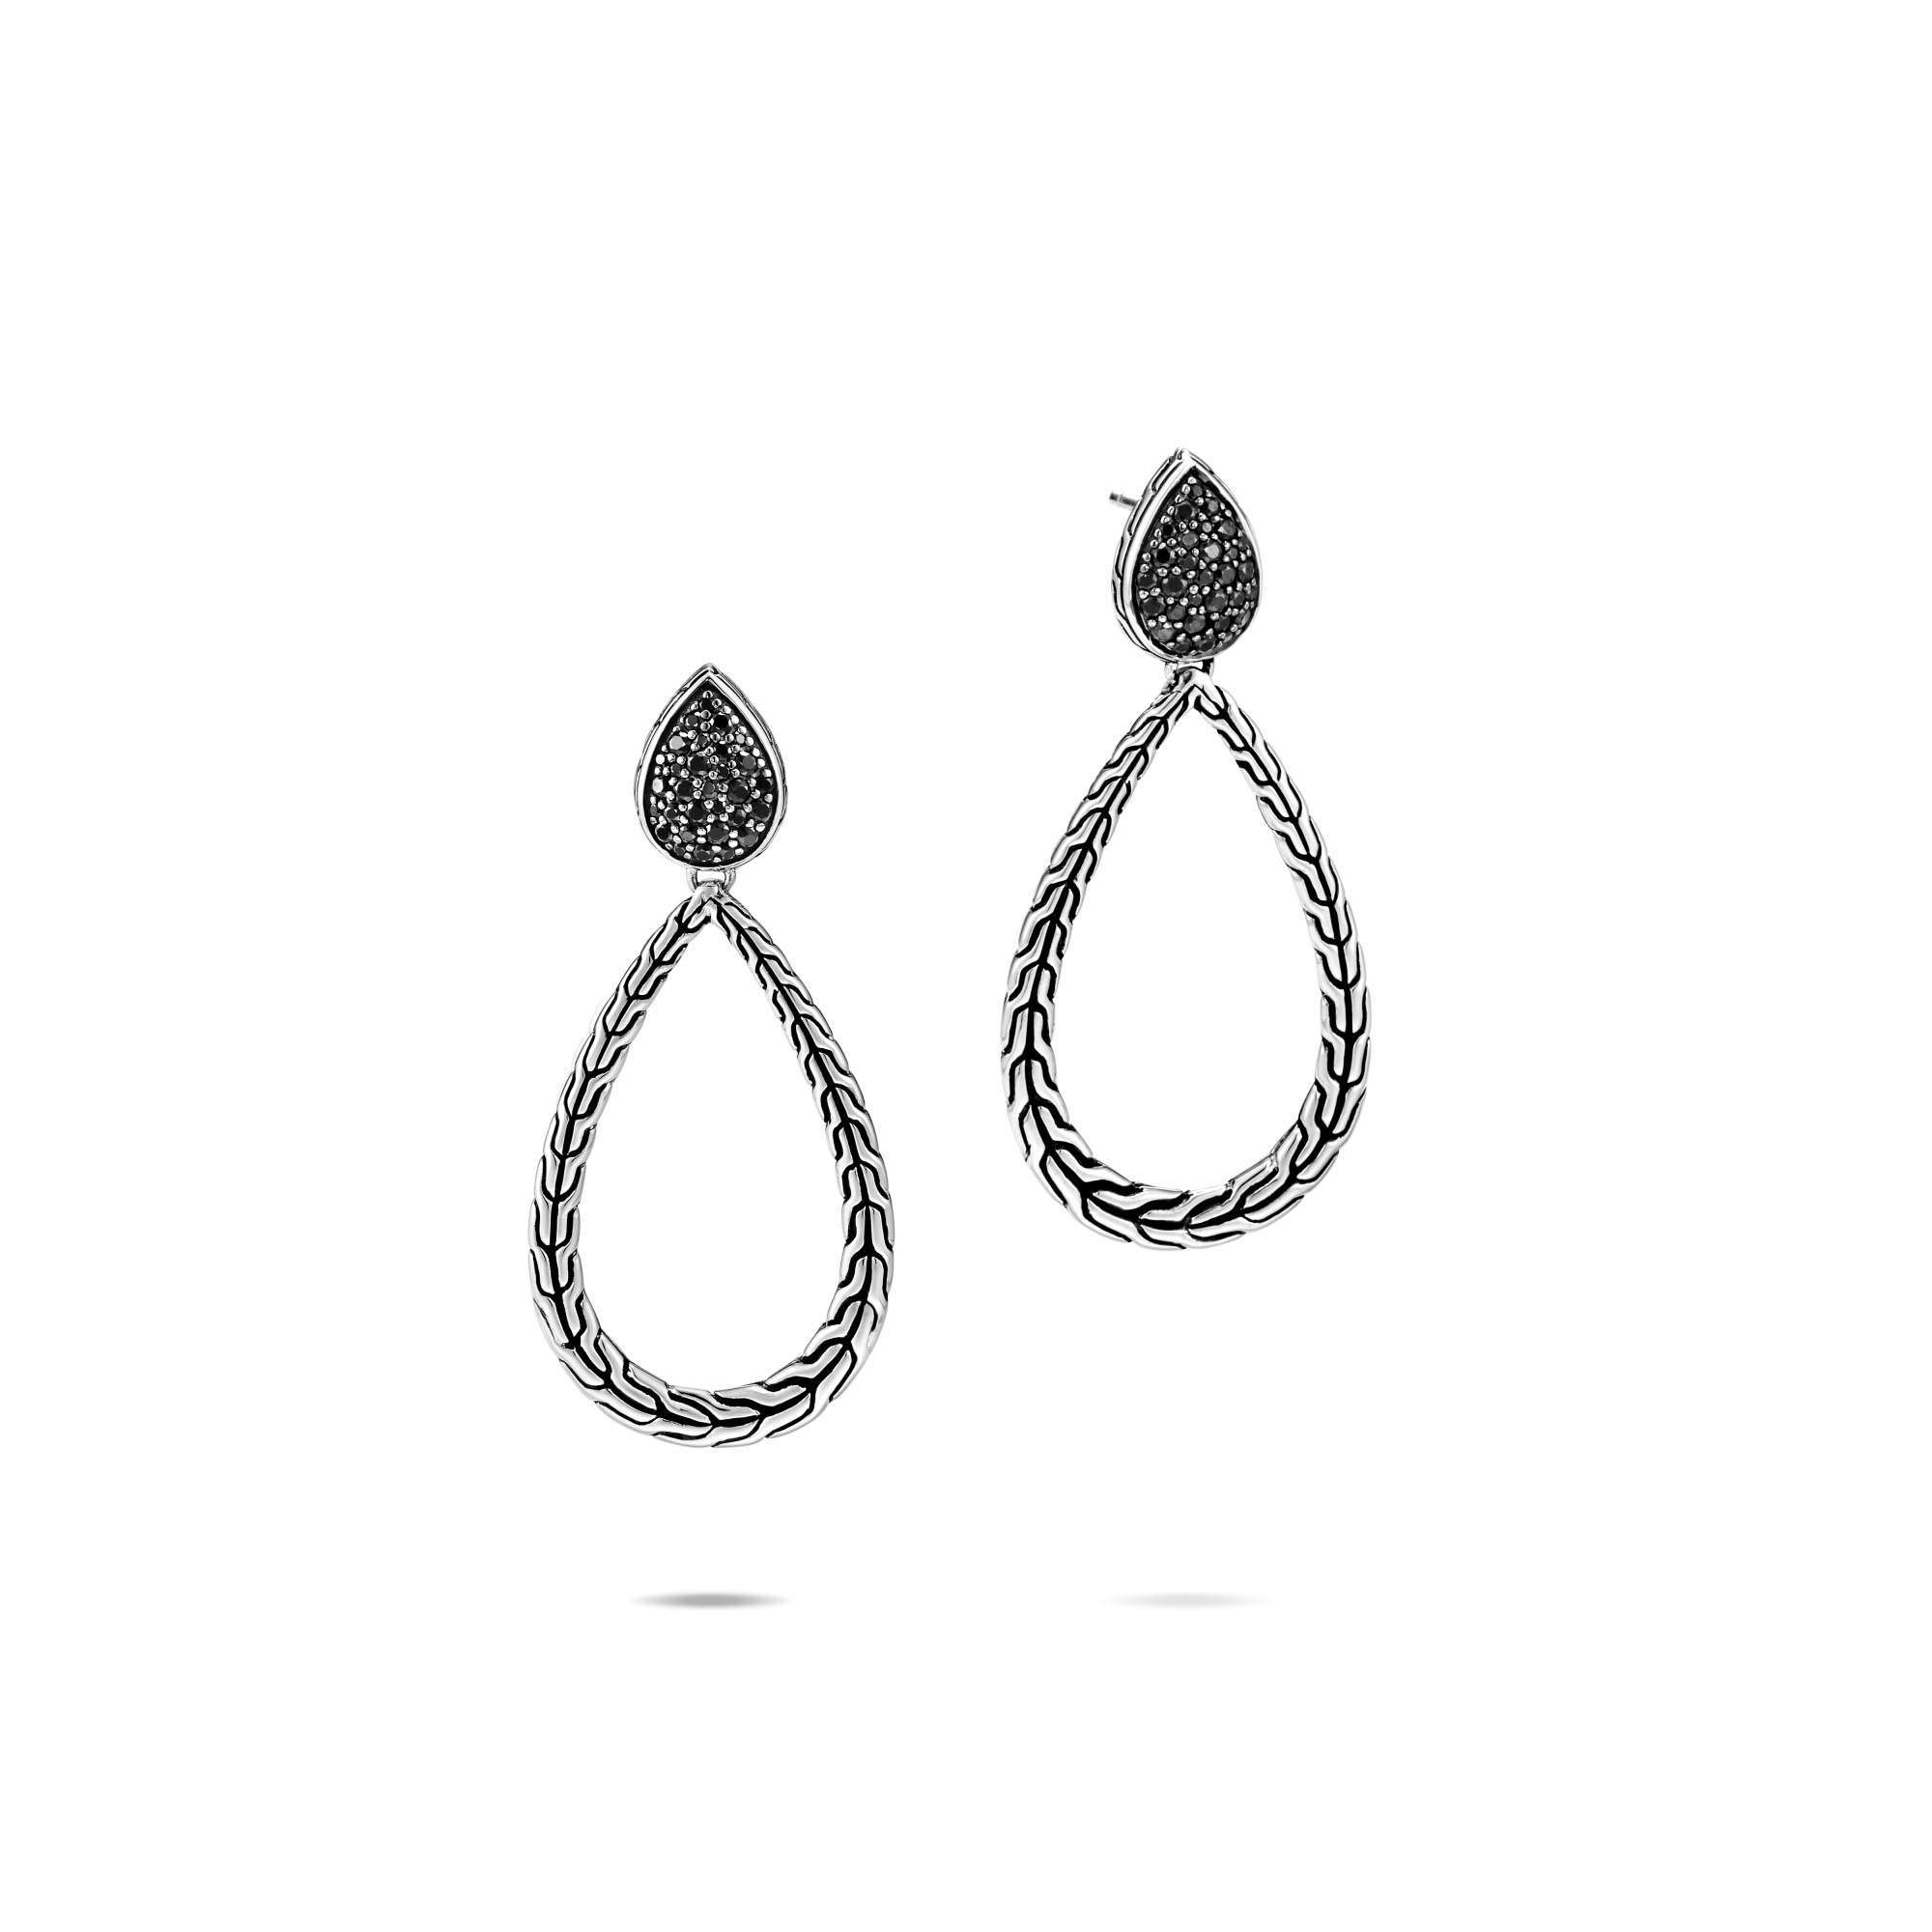 442767Classic-Chain-Drop-Earring-with-Black-Spinel.jpg